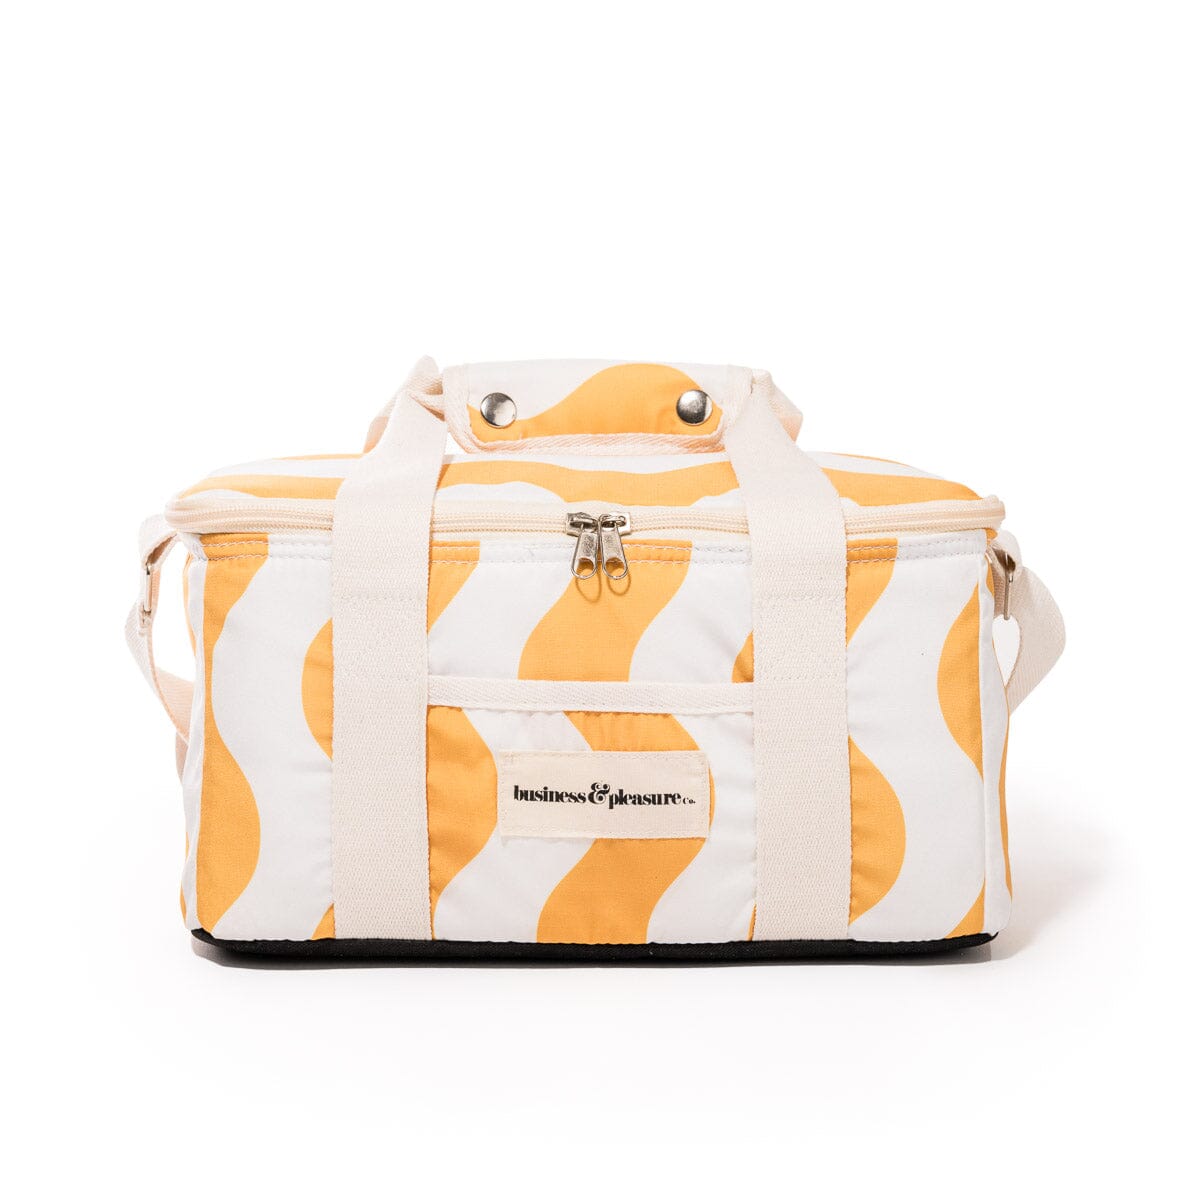 The Holiday Cooler Bag - Ocean Mimosa Stripe Holiday Cooler Business & Pleasure Co 